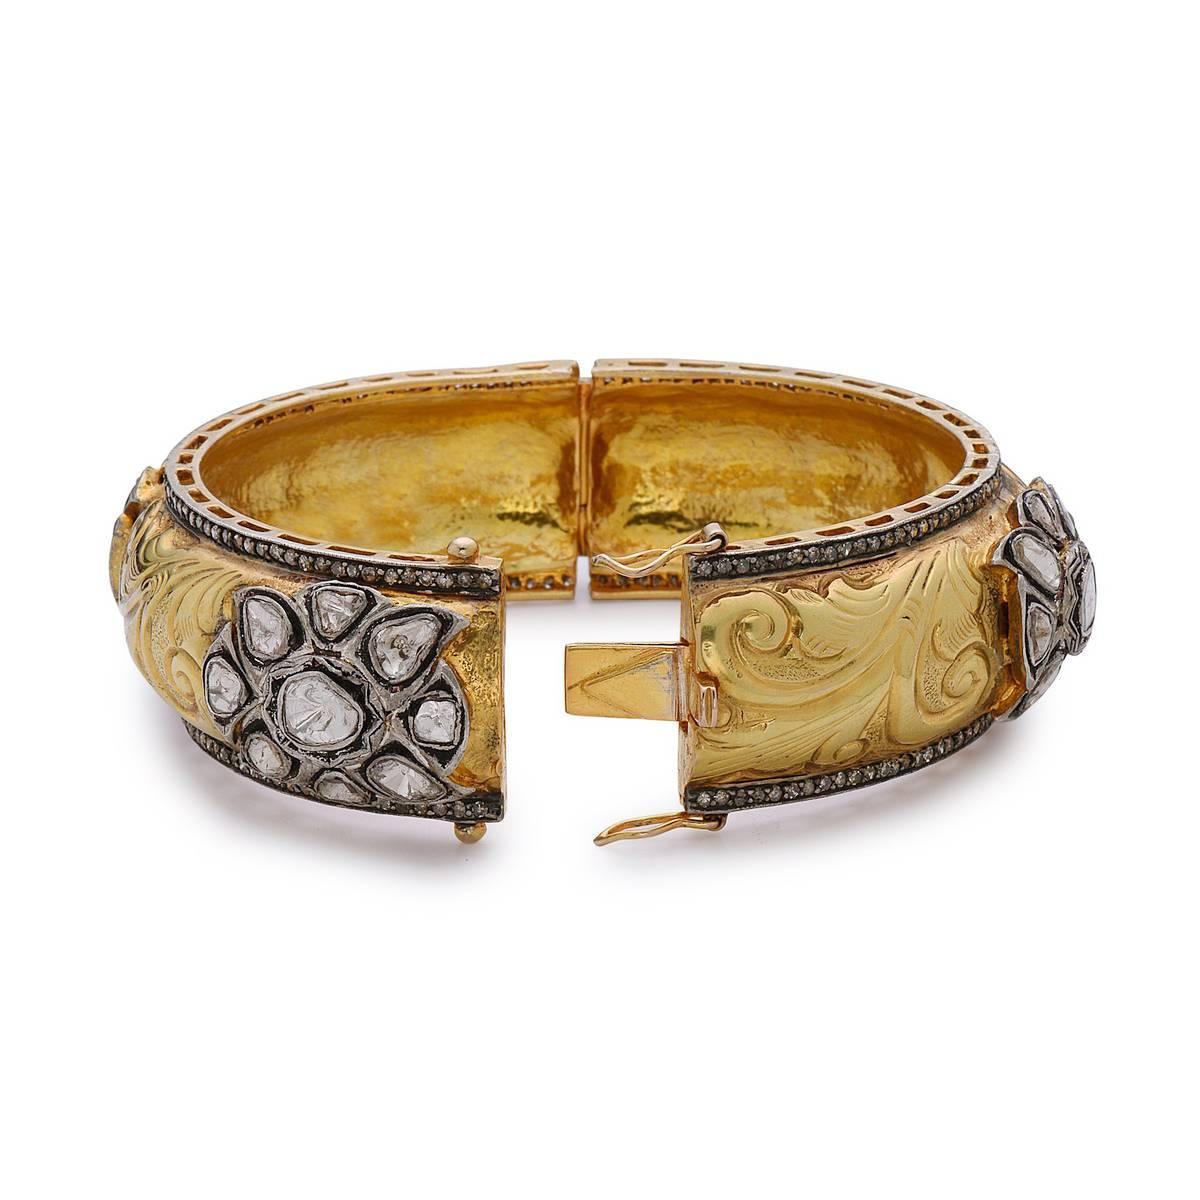 Adorn yourself with this super royal looking 14K yellow gold bangle with rose cut diamonds. This bangle is openable and has 2 safety clasps. Fits very well. The handcrafted embossed work all over the bangle with floral diamond motifs is absolutely